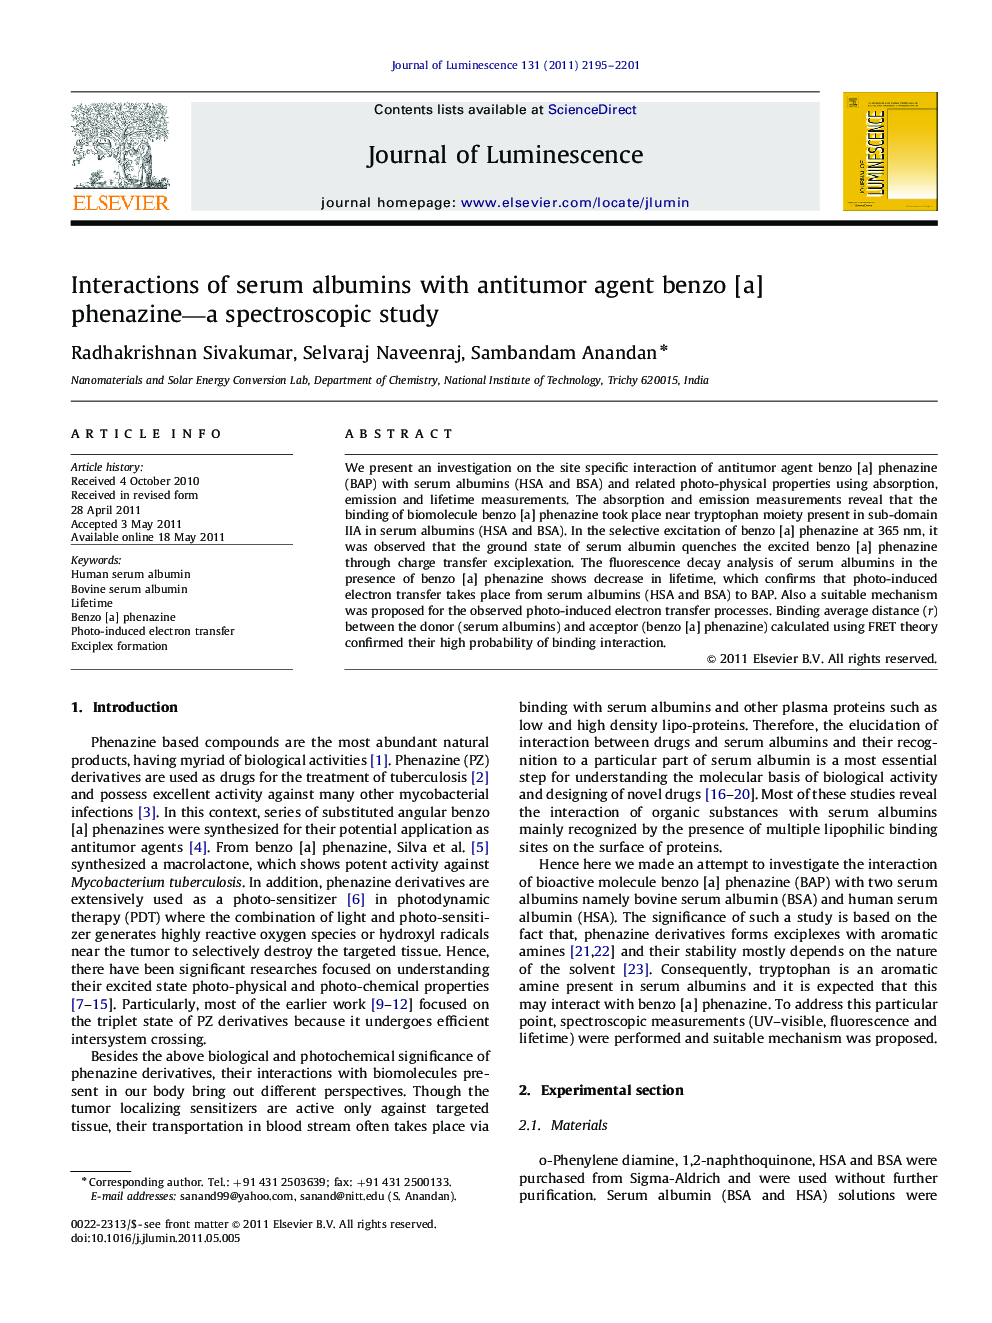 Interactions of serum albumins with antitumor agent benzo [a] phenazine-a spectroscopic study